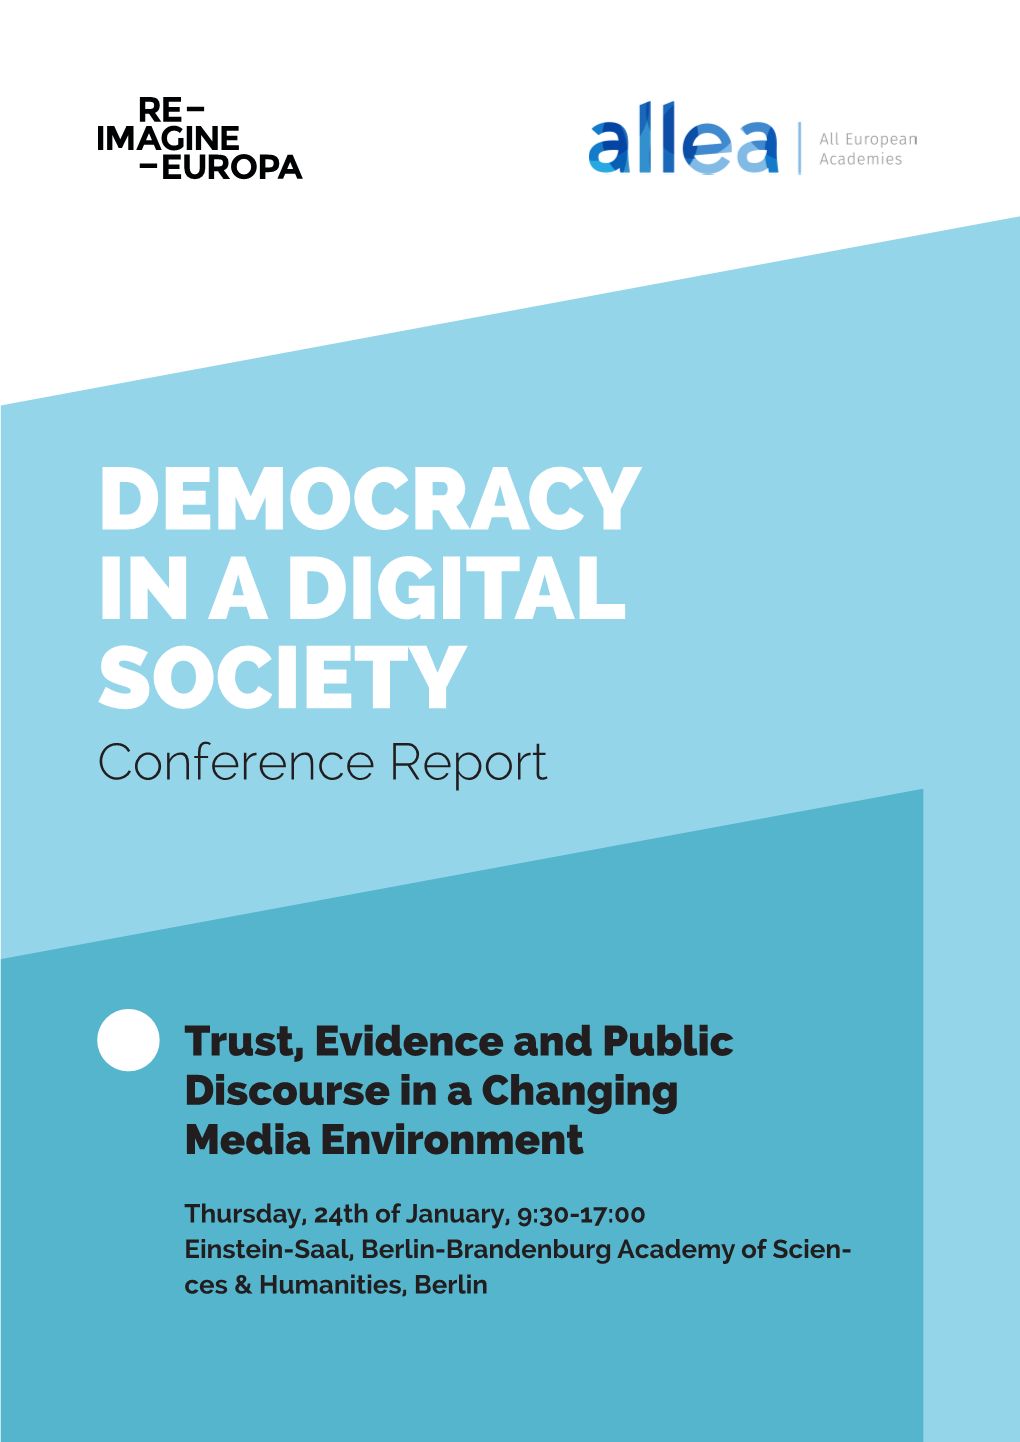 DEMOCRACY in a DIGITAL SOCIETY Conference Report